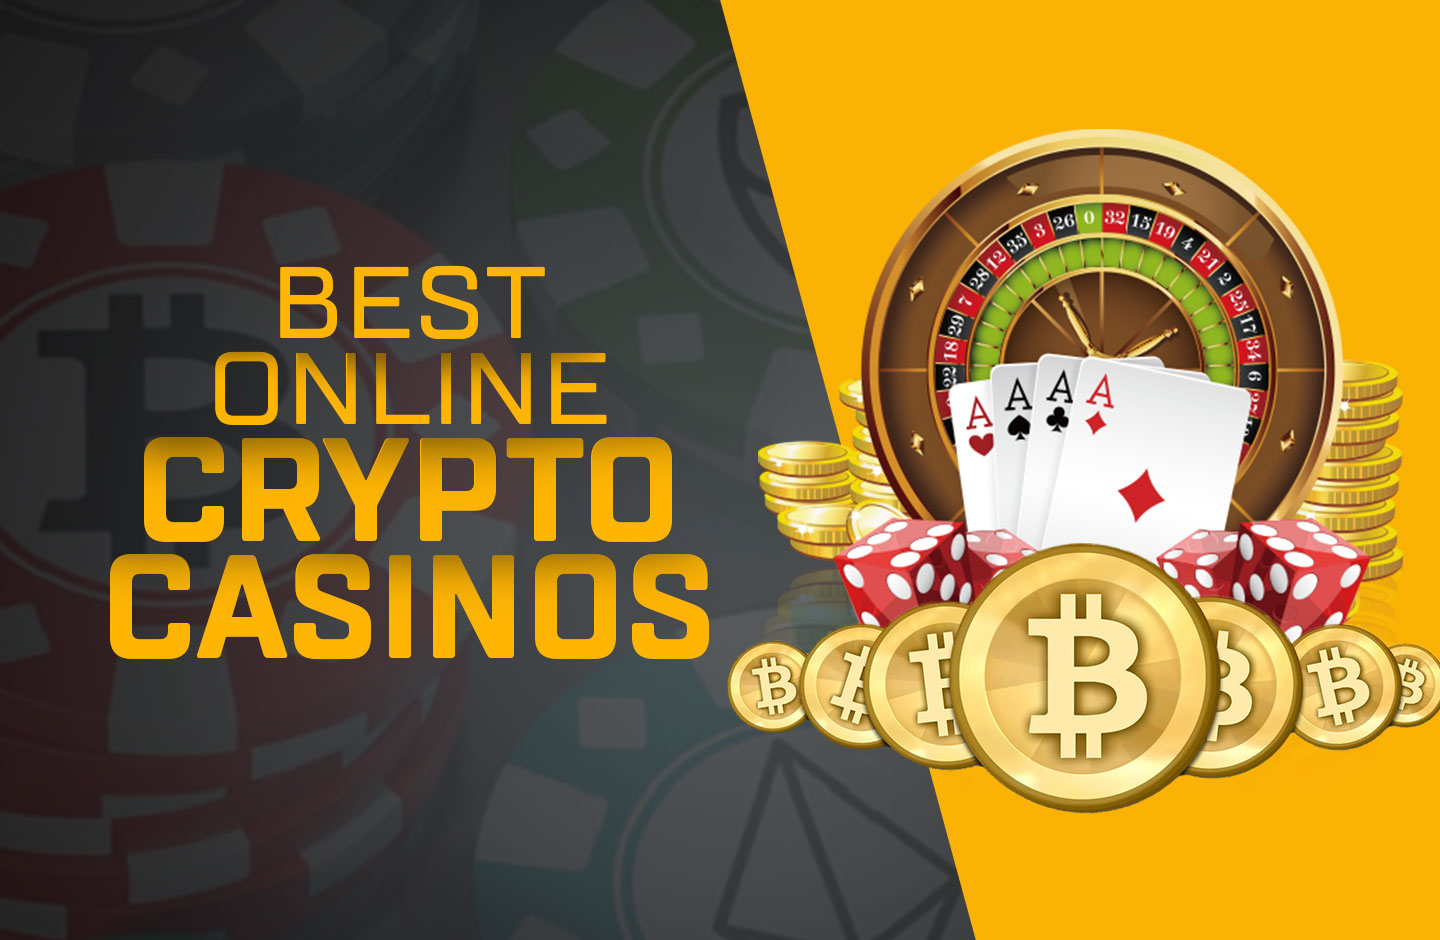 Are You Good At best bitcoin casinos? Here's A Quick Quiz To Find Out